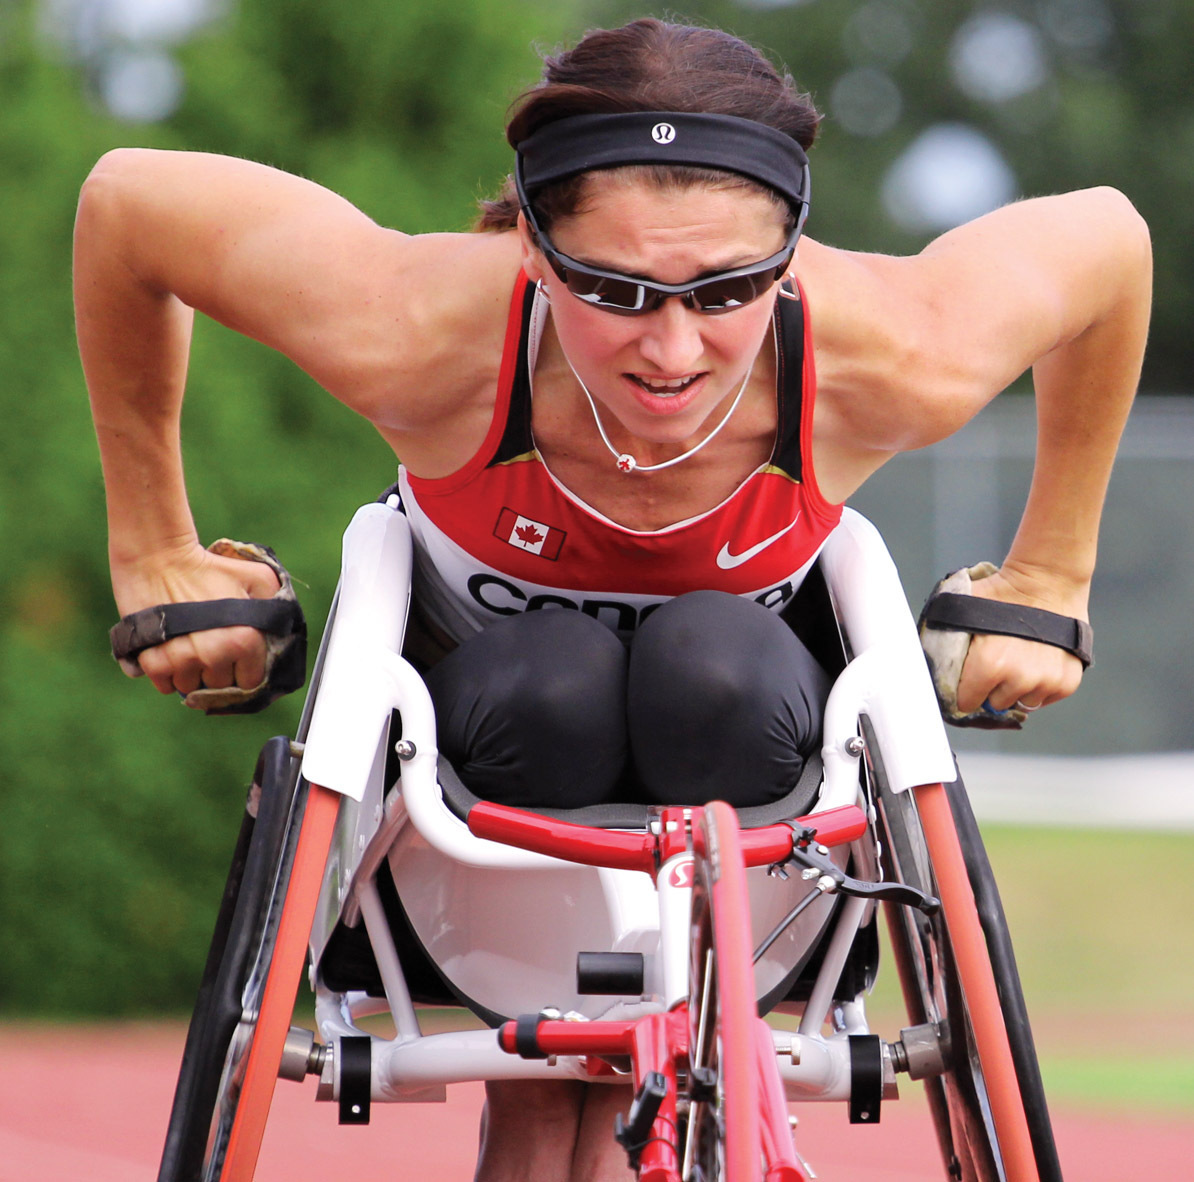 Michelle Stilwell racing in wheelchair on track